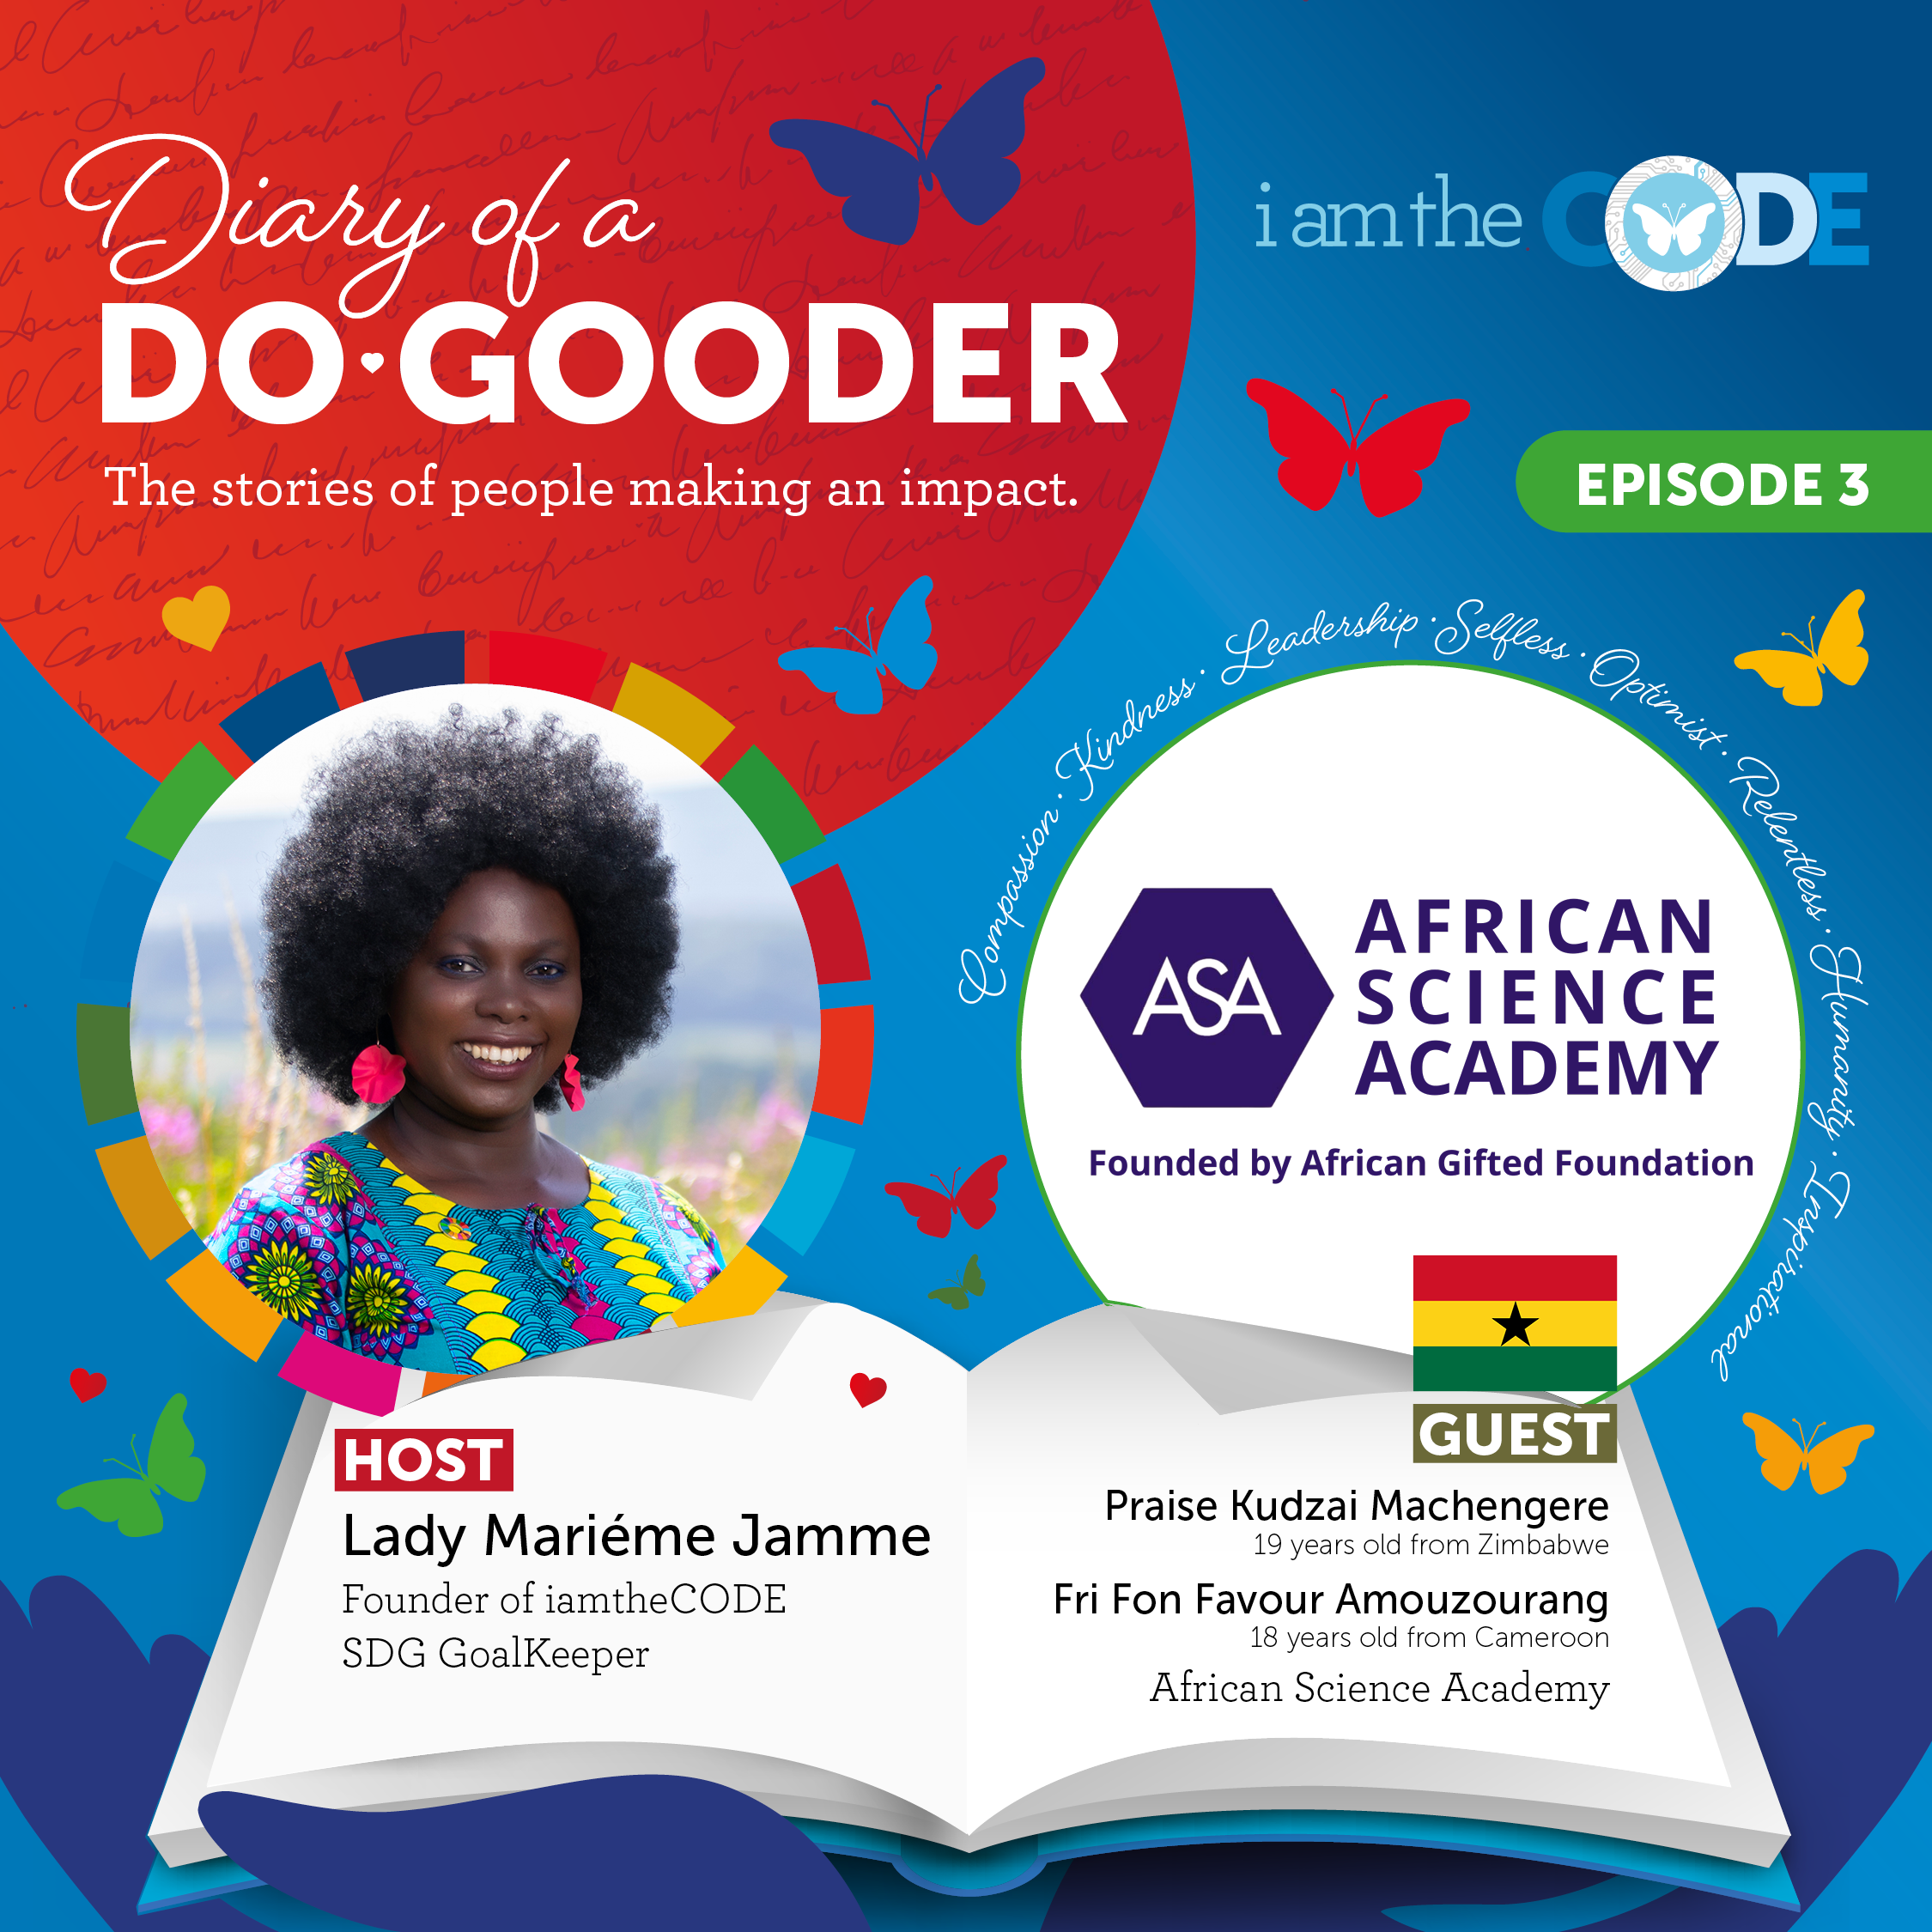 S7E3 Diary Of A Do-Gooder – How To Motivate People To Do Good For Others